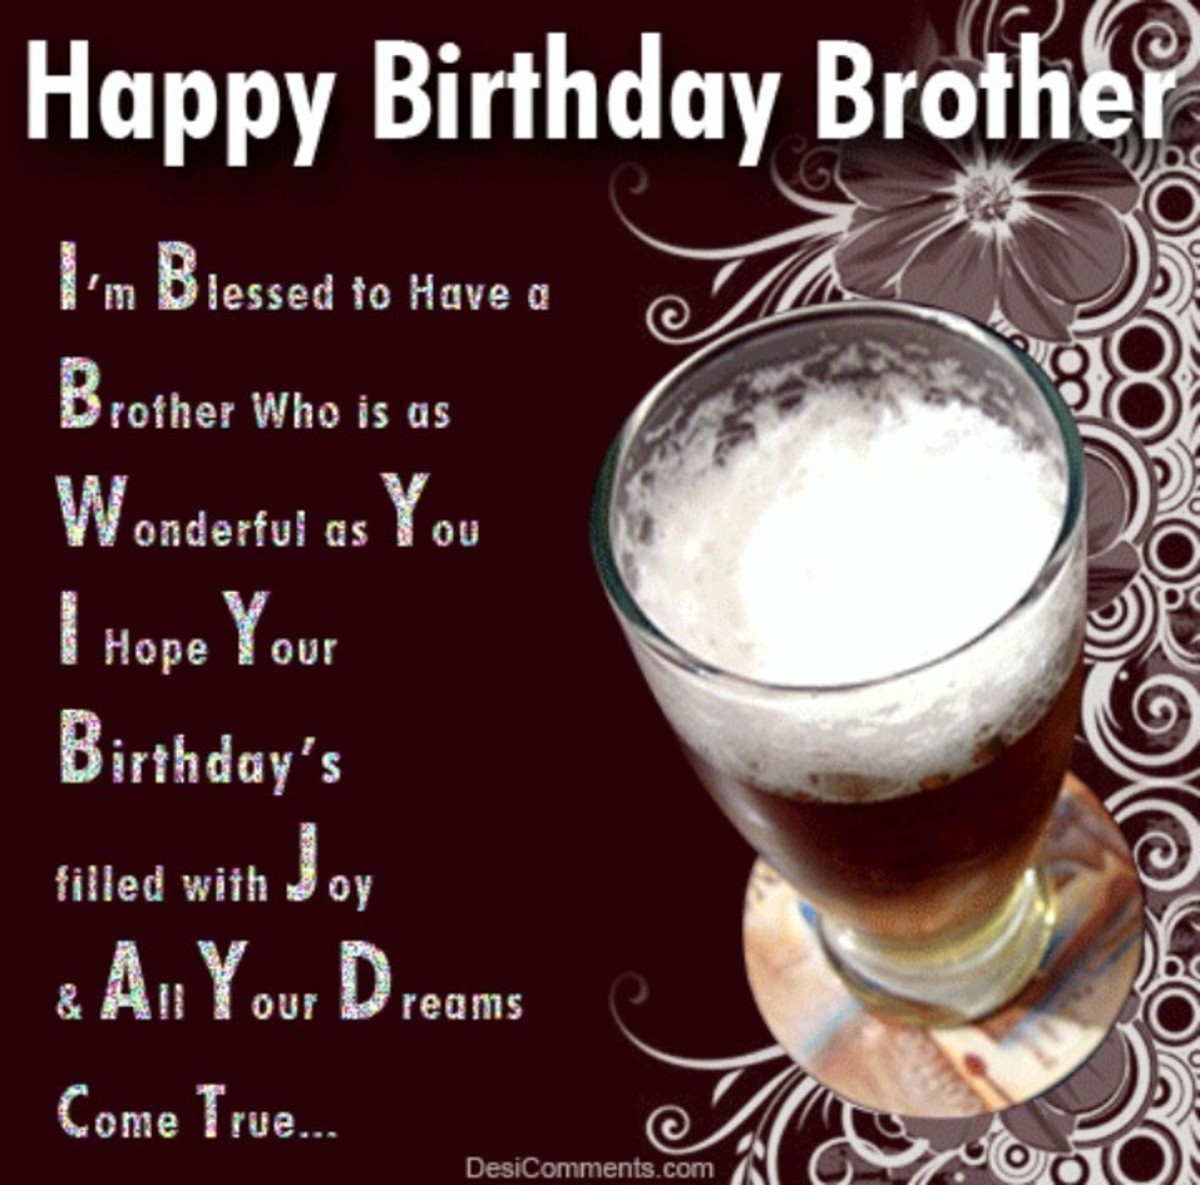 Birthday Wishes, Cards, and Quotes for Your Brother HubPages